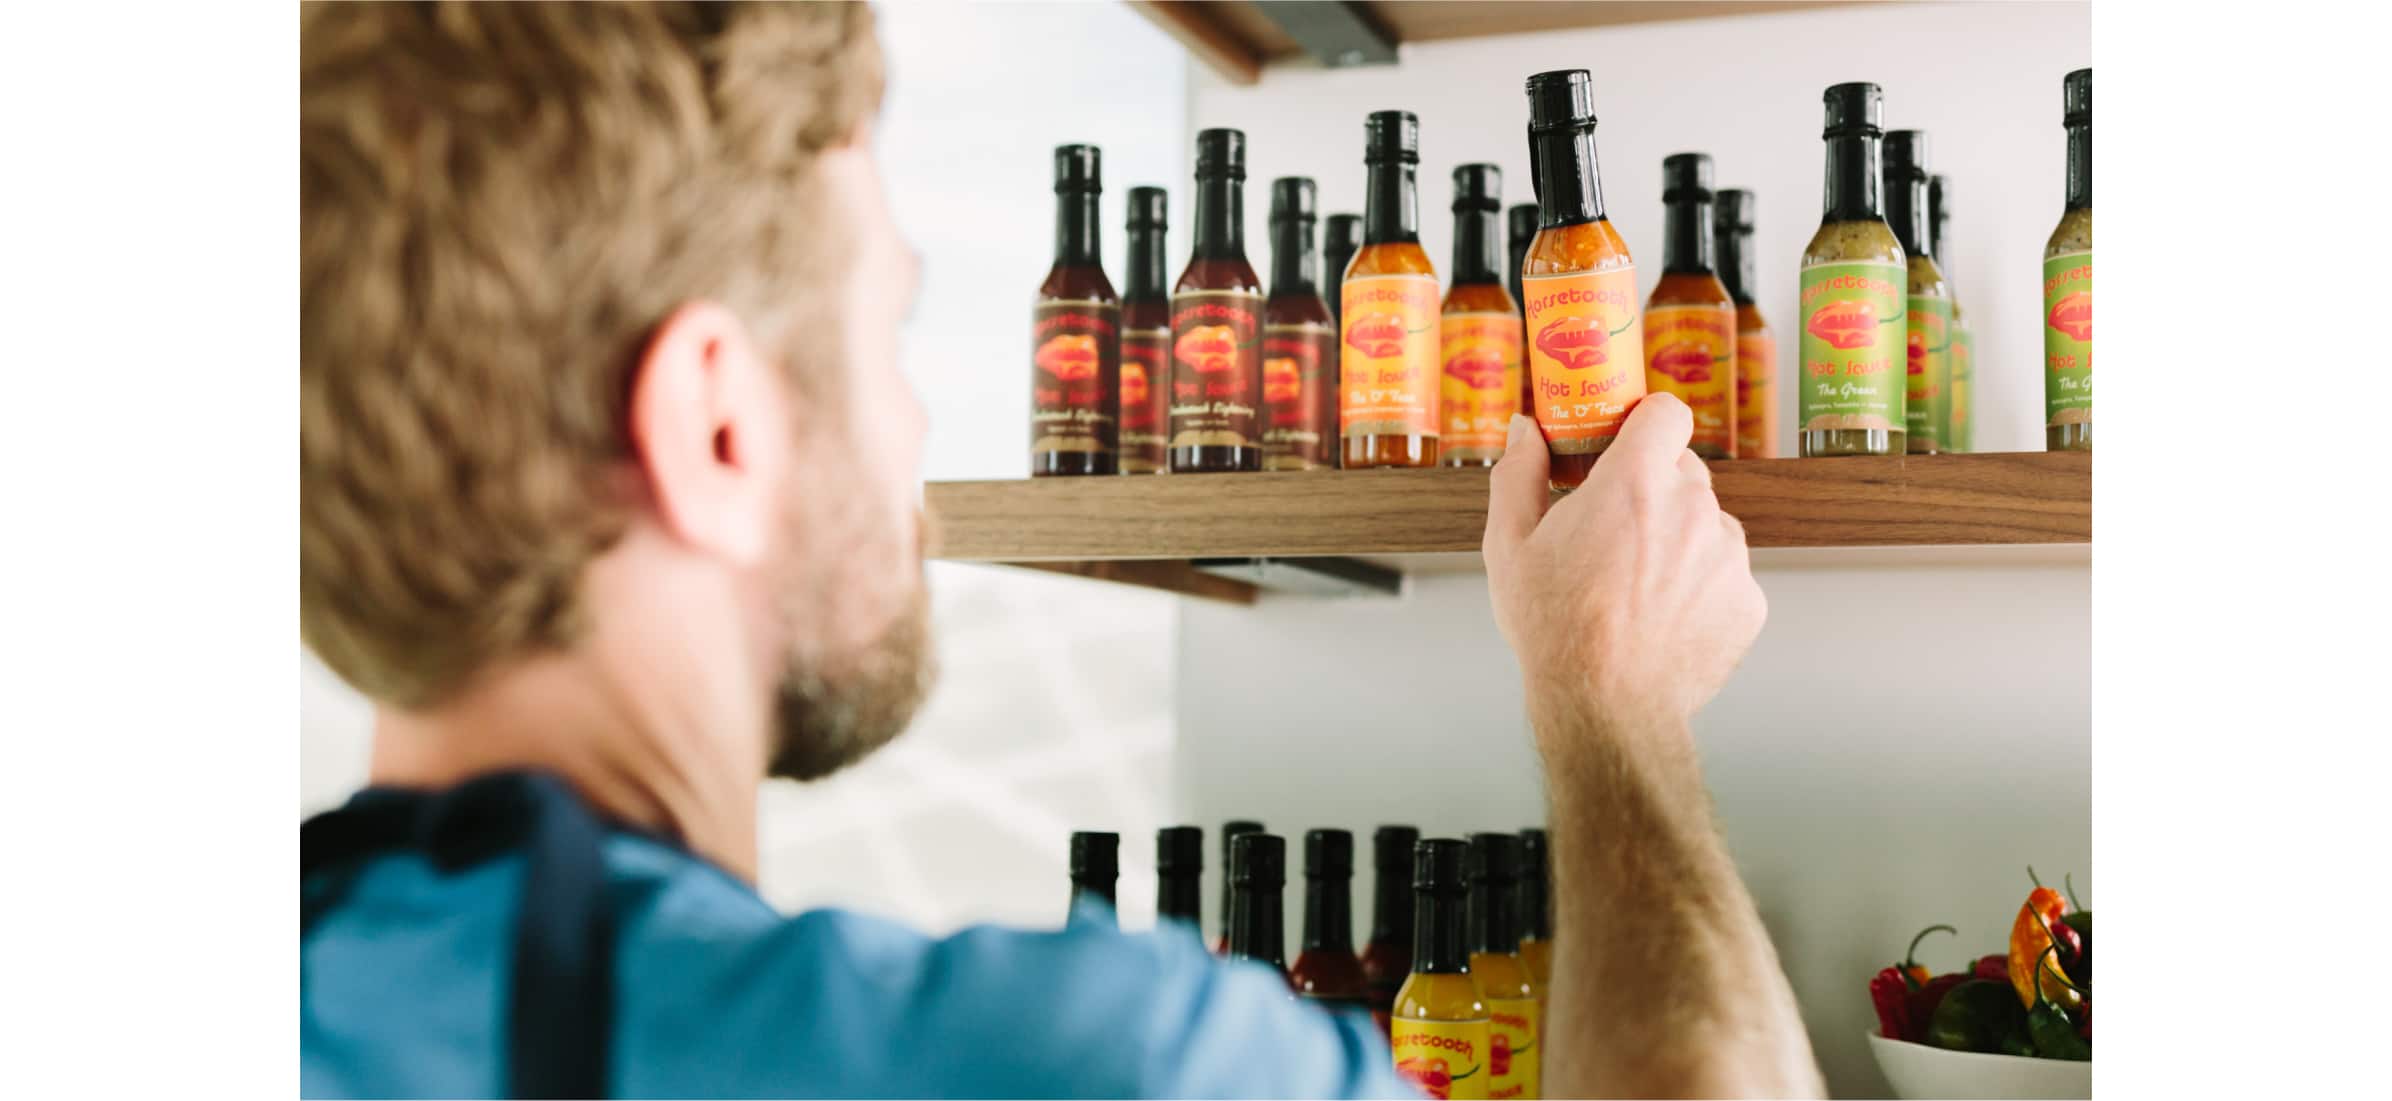 John grabbing a small sauce bottle from a shelf lined with many others.